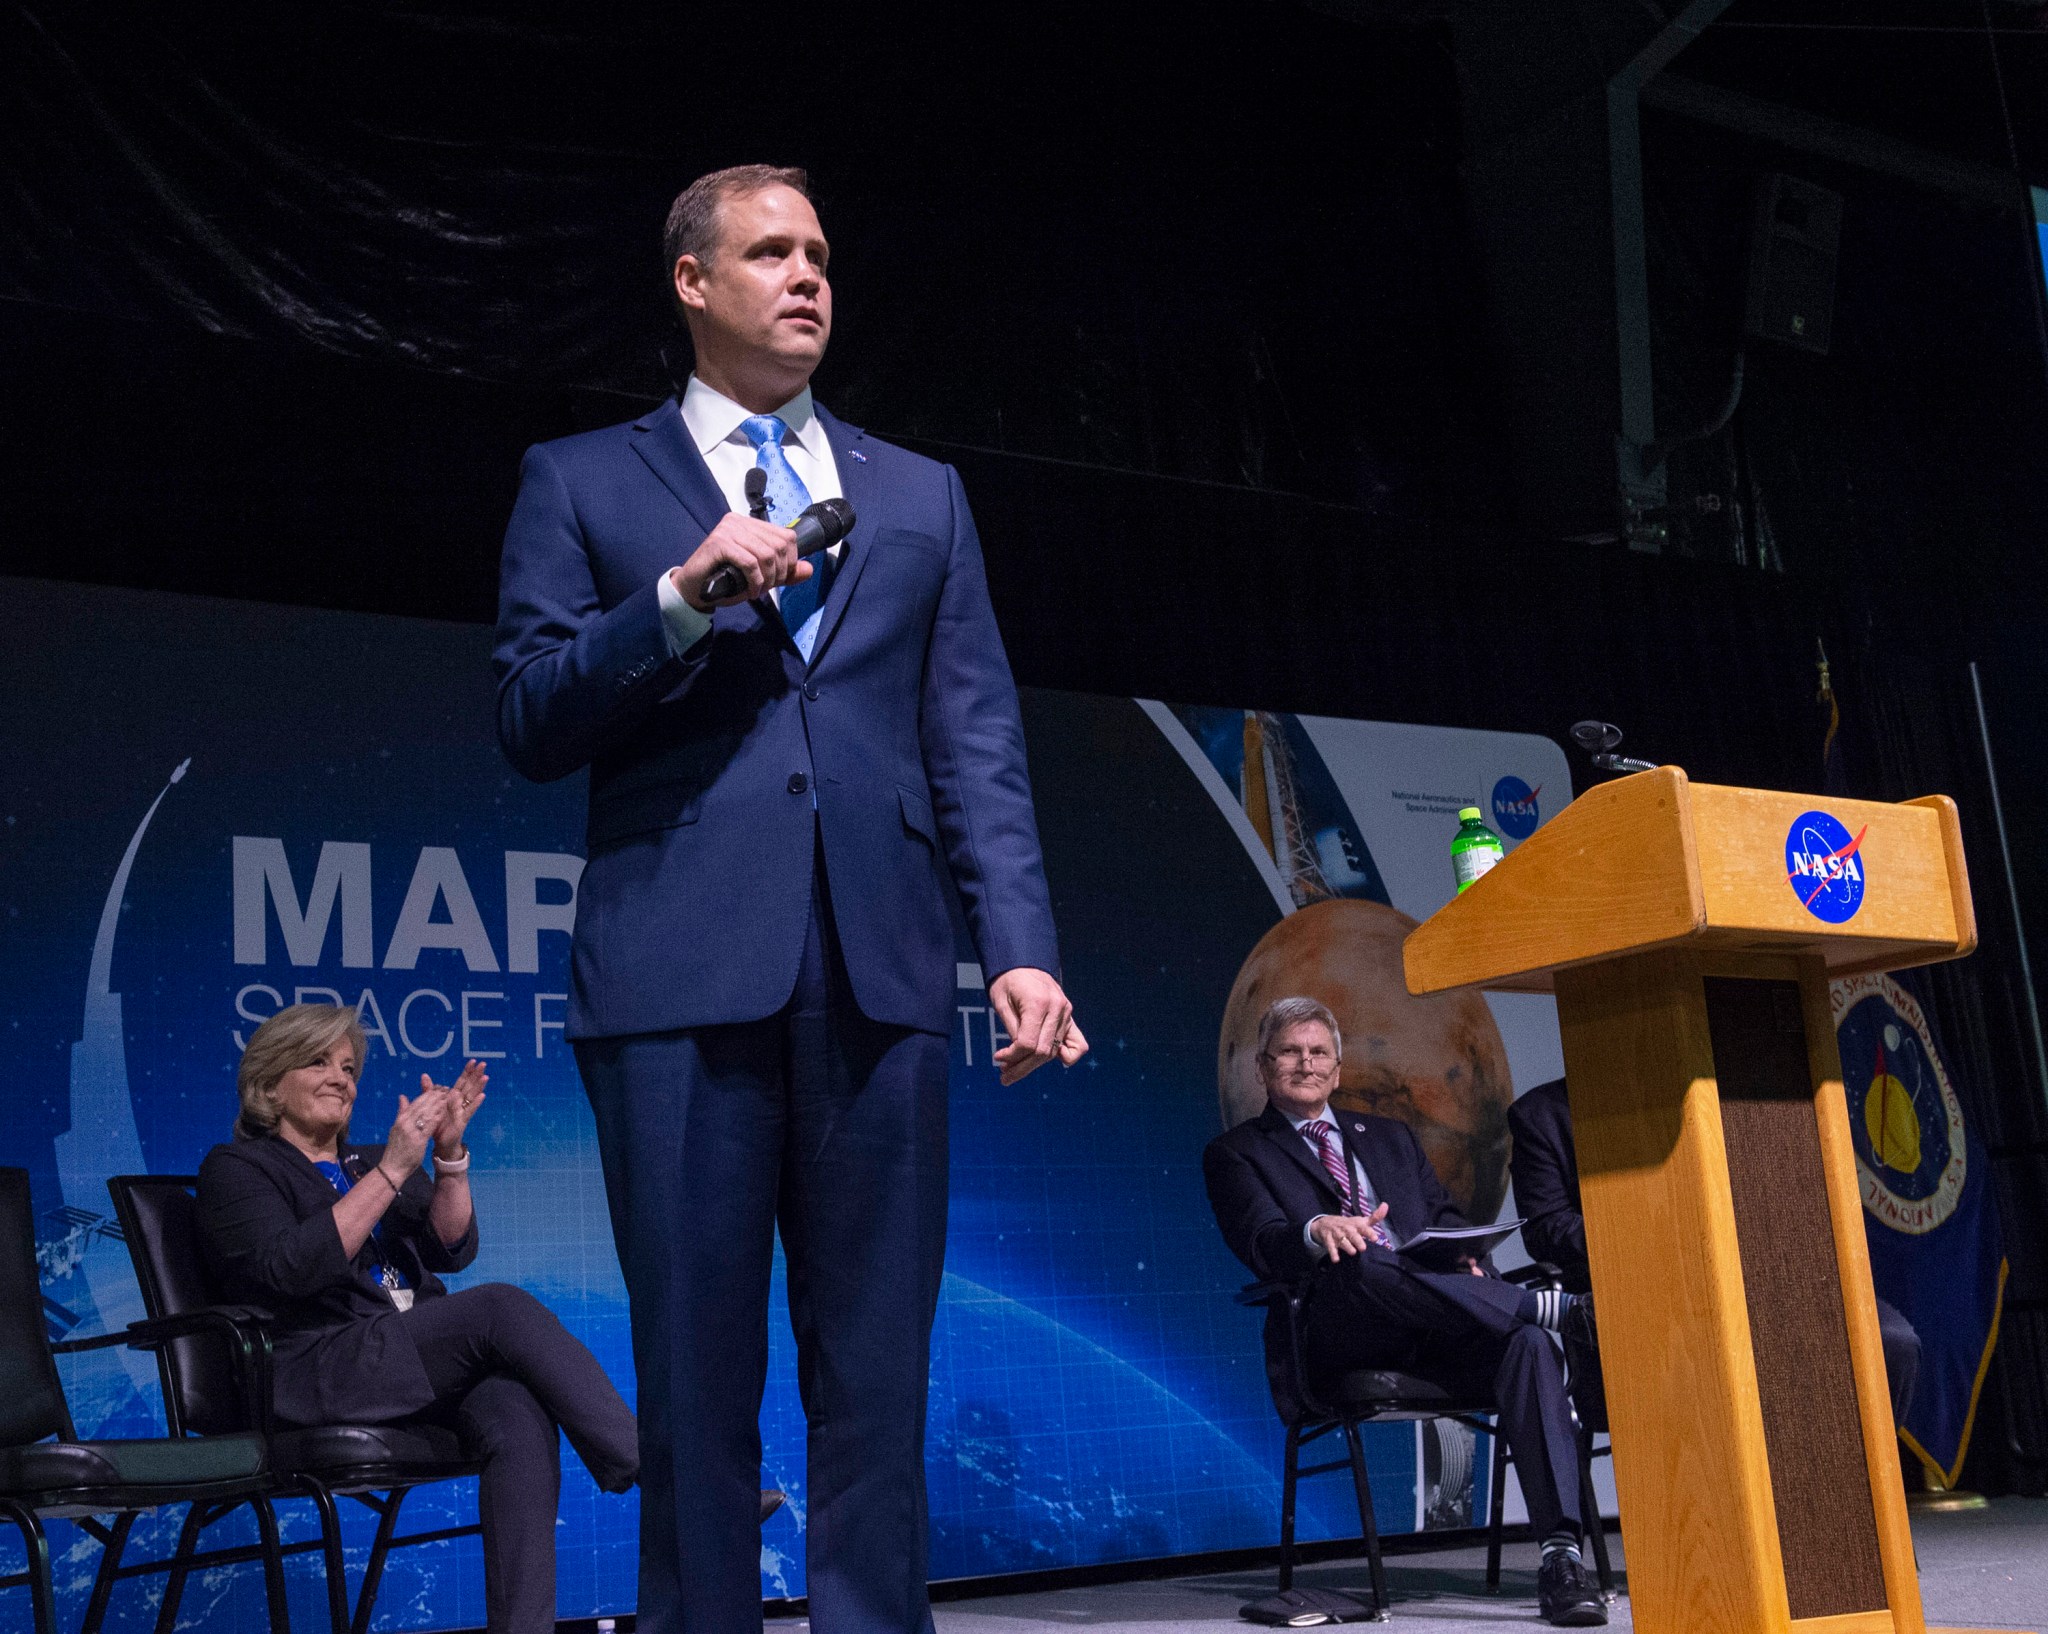 NASA Administrator Jim Bridenstine addresses Marshall team members during his March 26 all-hands event.